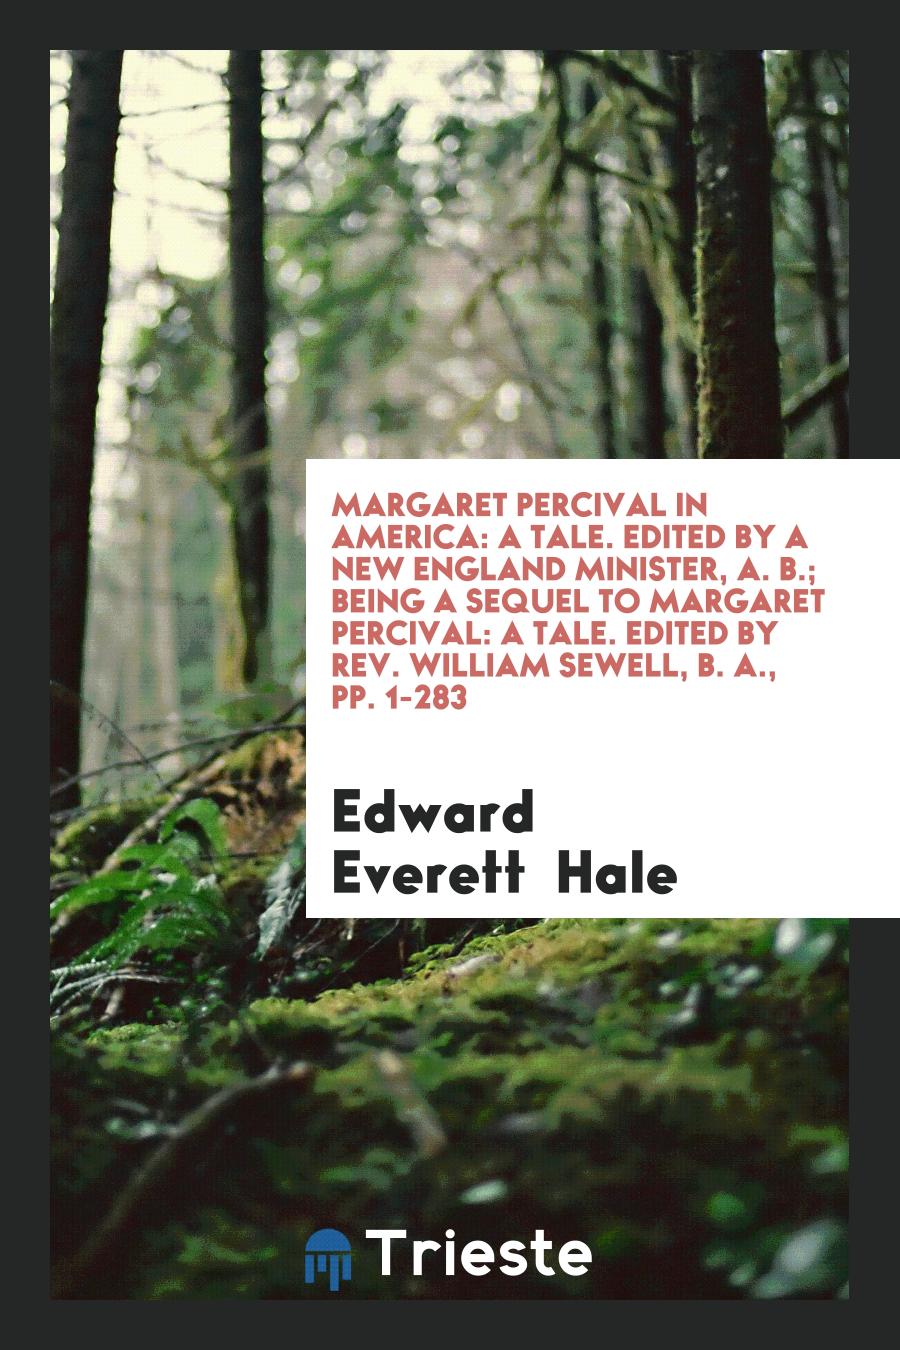 Margaret Percival in America: A Tale. Edited by a New England Minister, A. B.; Being a Sequel to Margaret Percival: A Tale. Edited by Rev. William Sewell, B. A., pp. 1-283